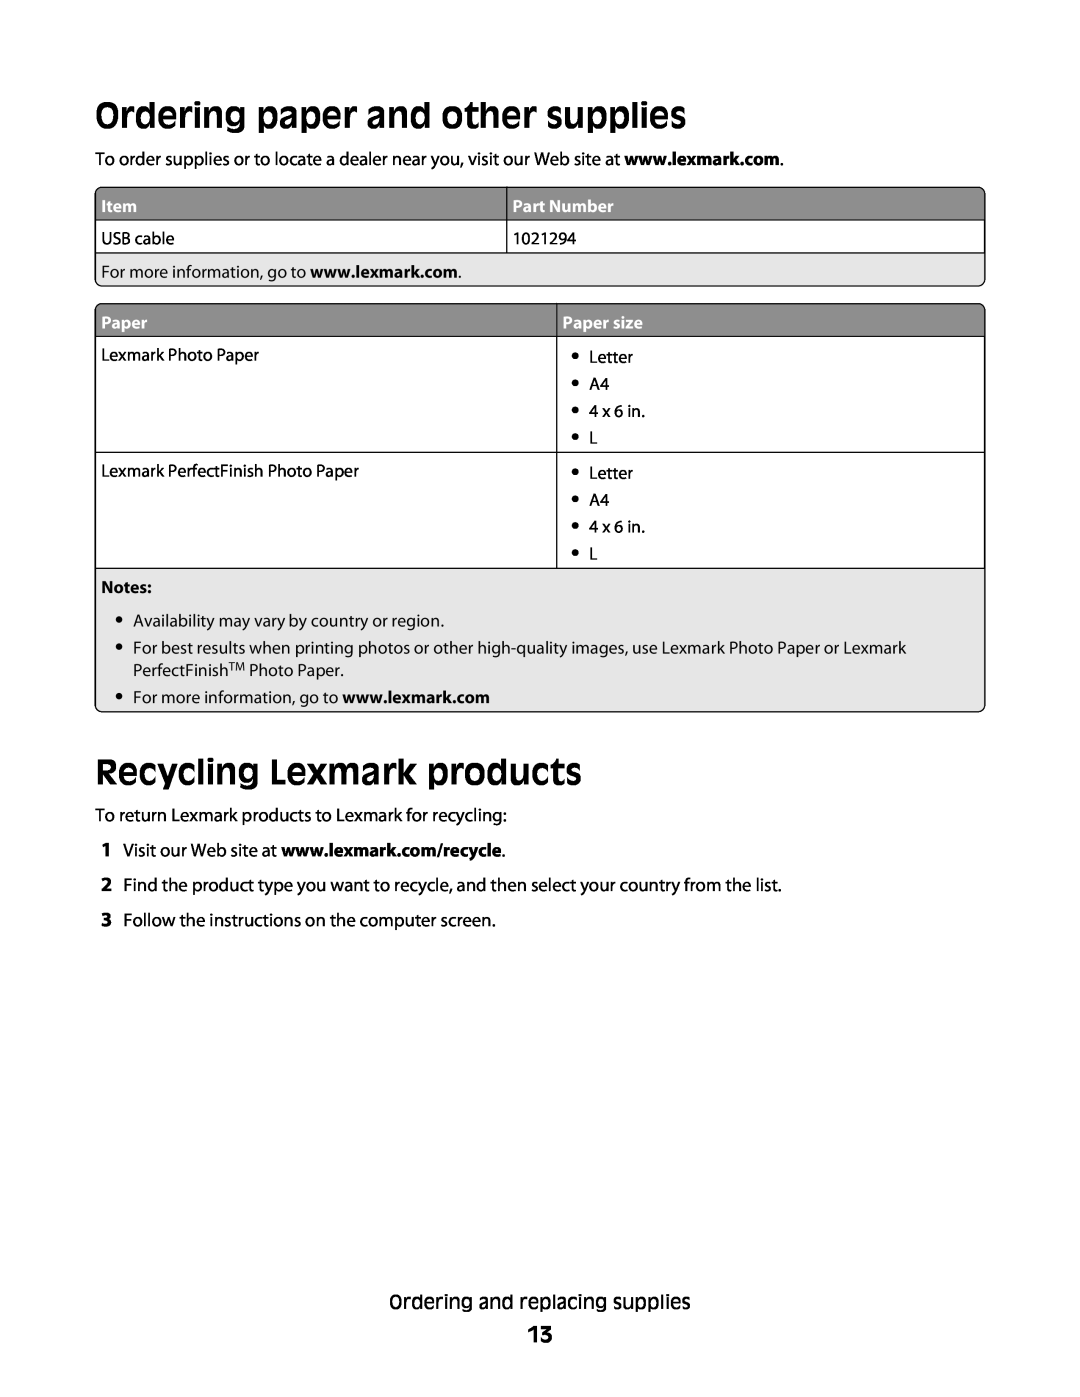 Lexmark 10E, 101 manual Ordering paper and other supplies, Recycling Lexmark products 